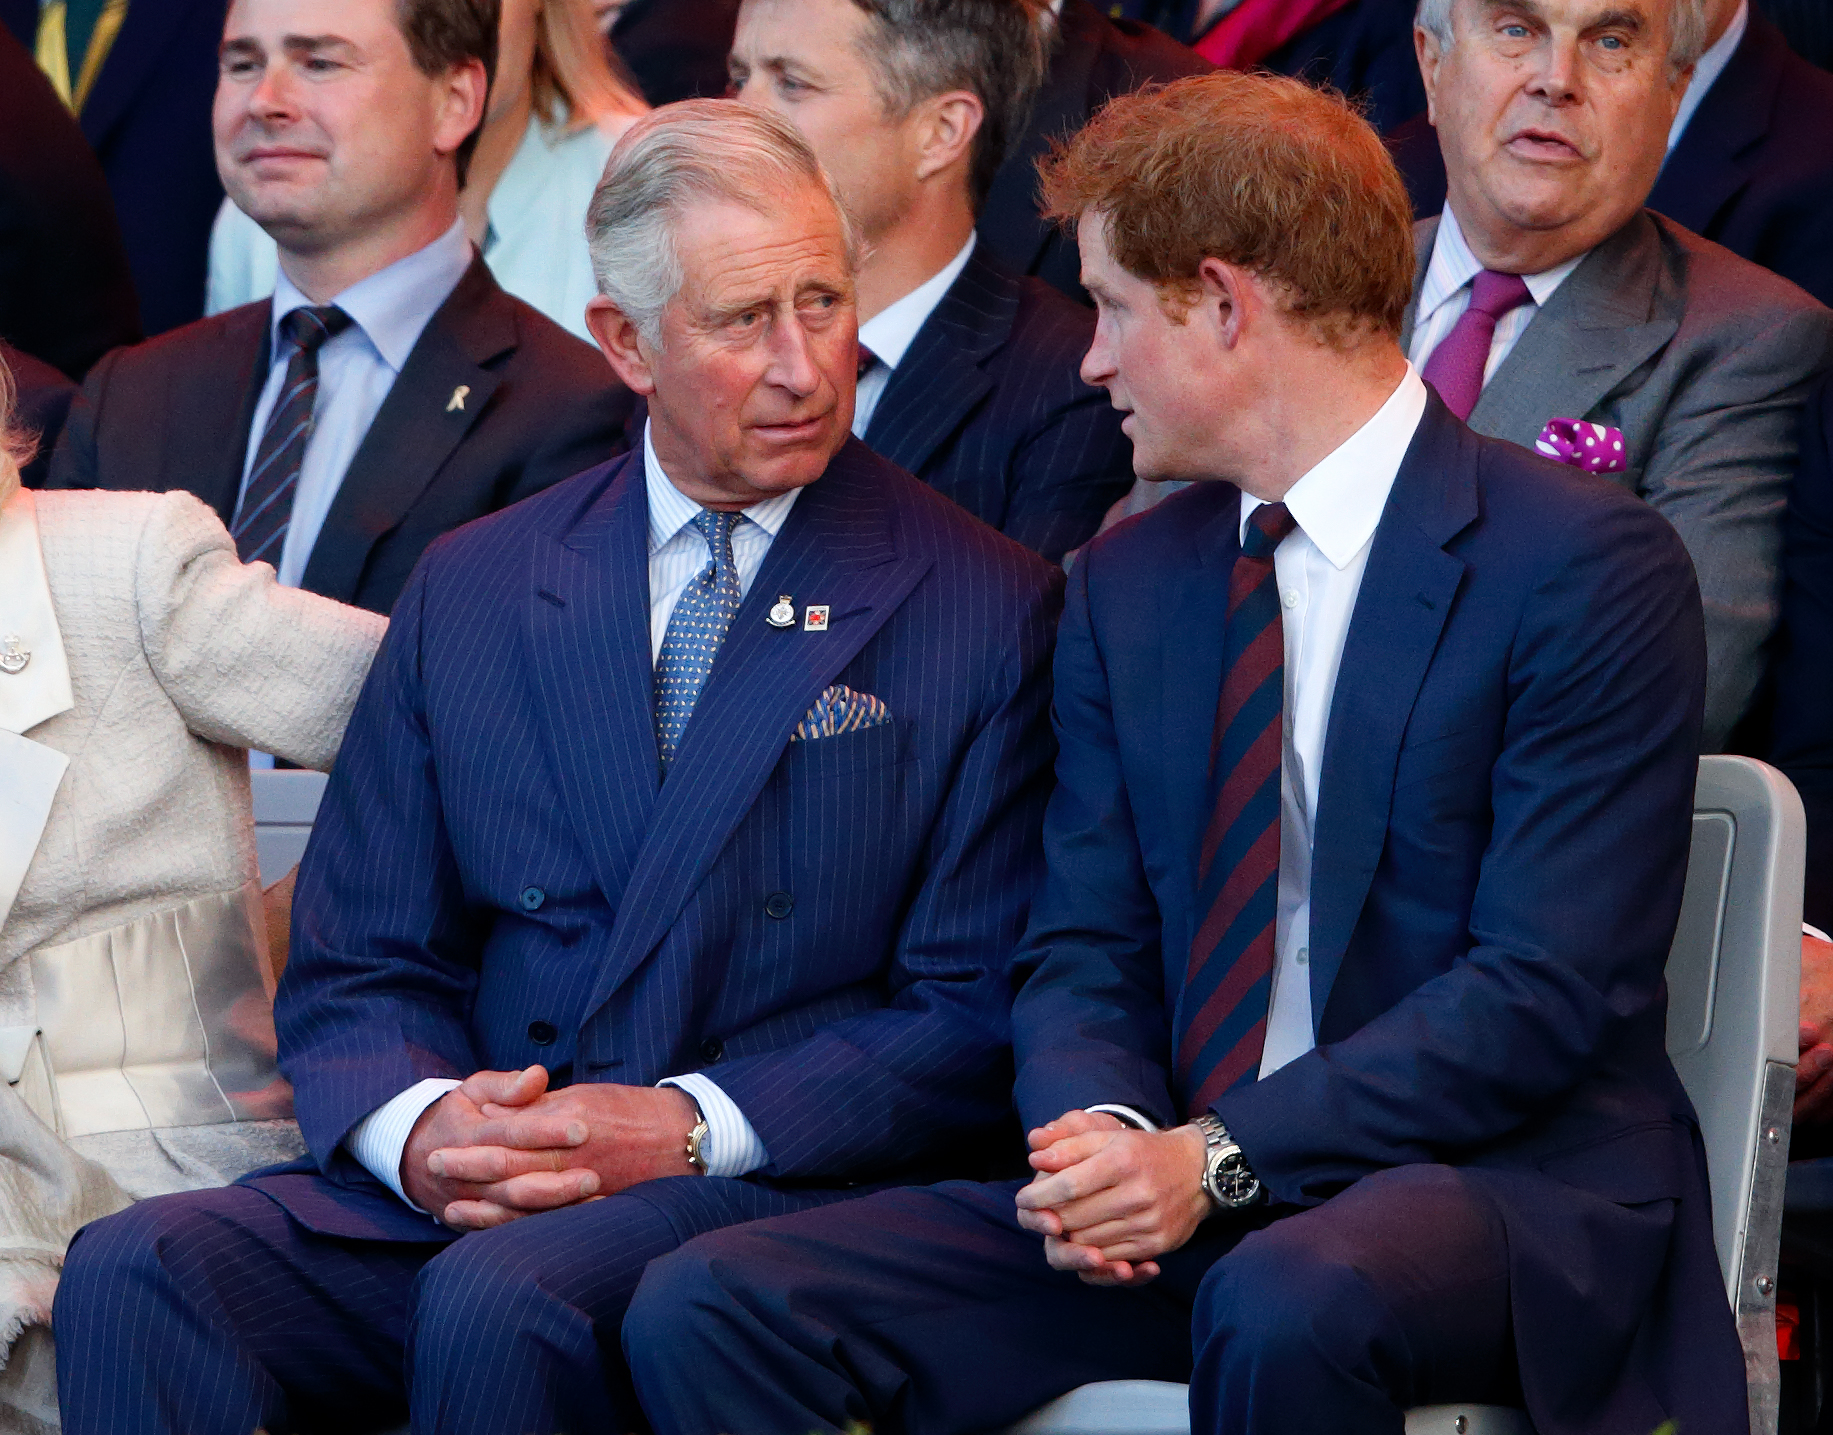 King Charles III and Prince Harry having a conversation during the the Opening Ceremony of the Invictus Games in London, England on September 10, 2014 | Source: Getty Images